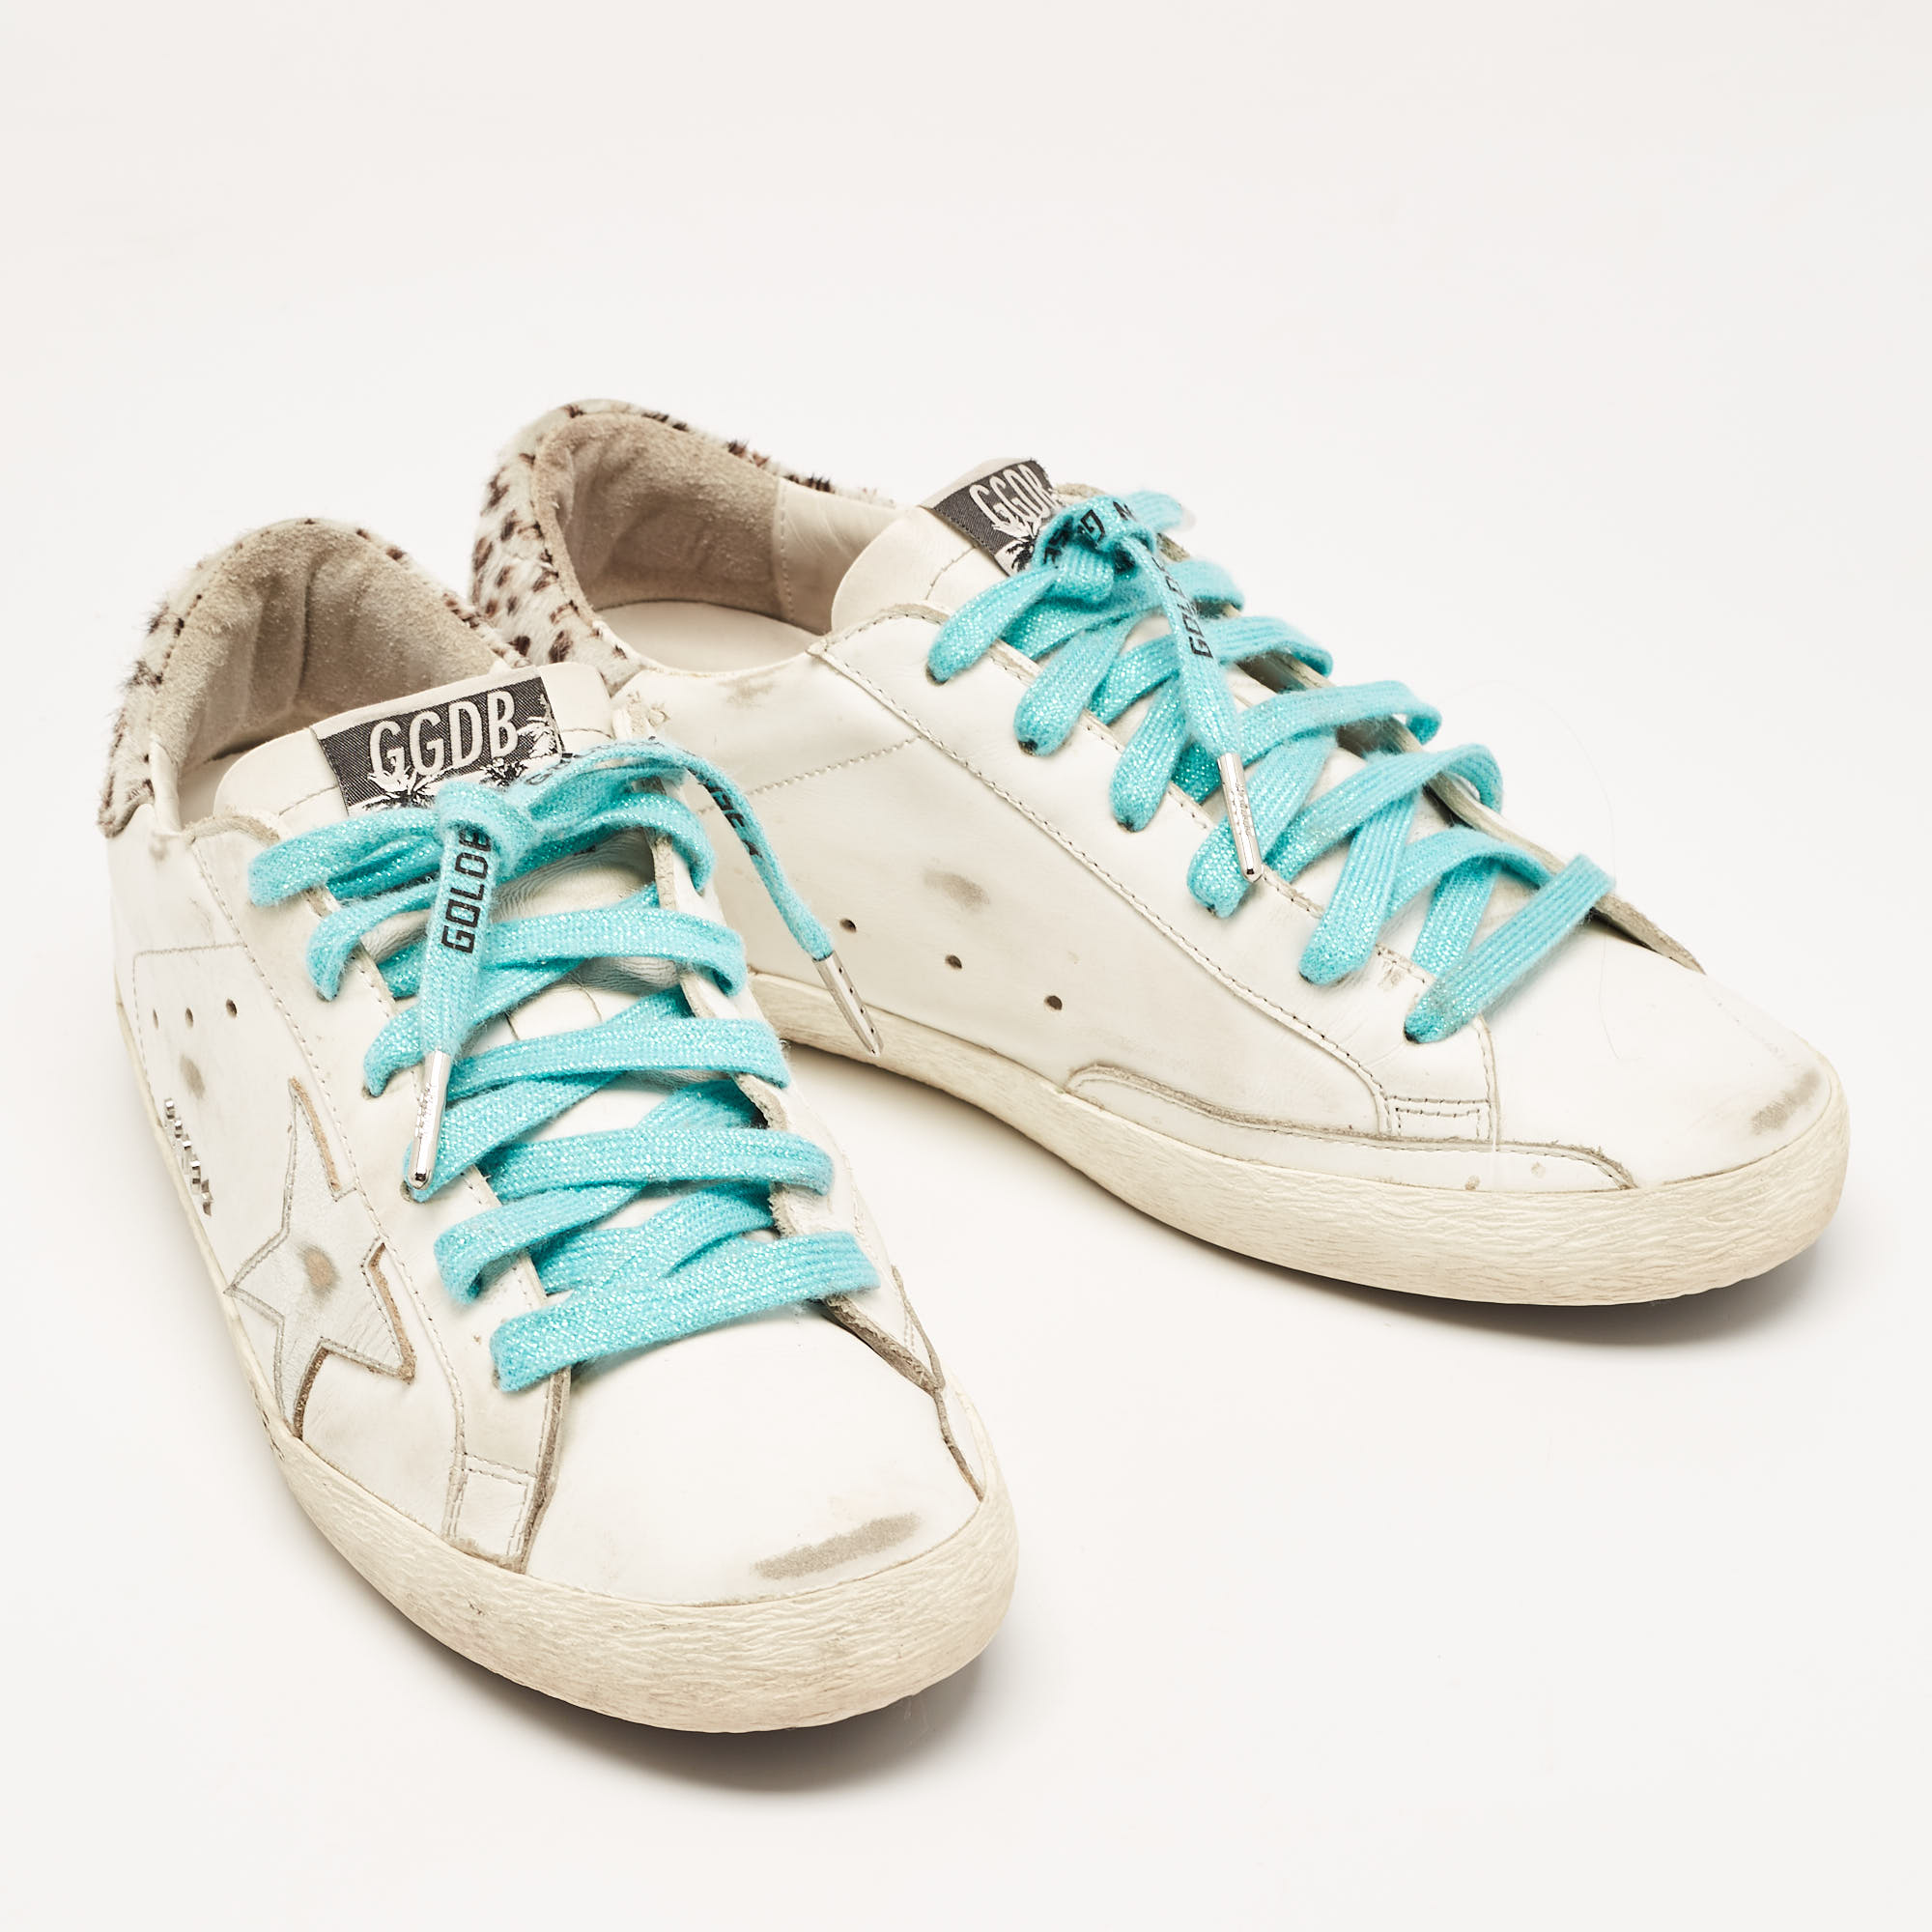 Golden Goose White Leather And Calf Hair Superstar Sneakers Size 41